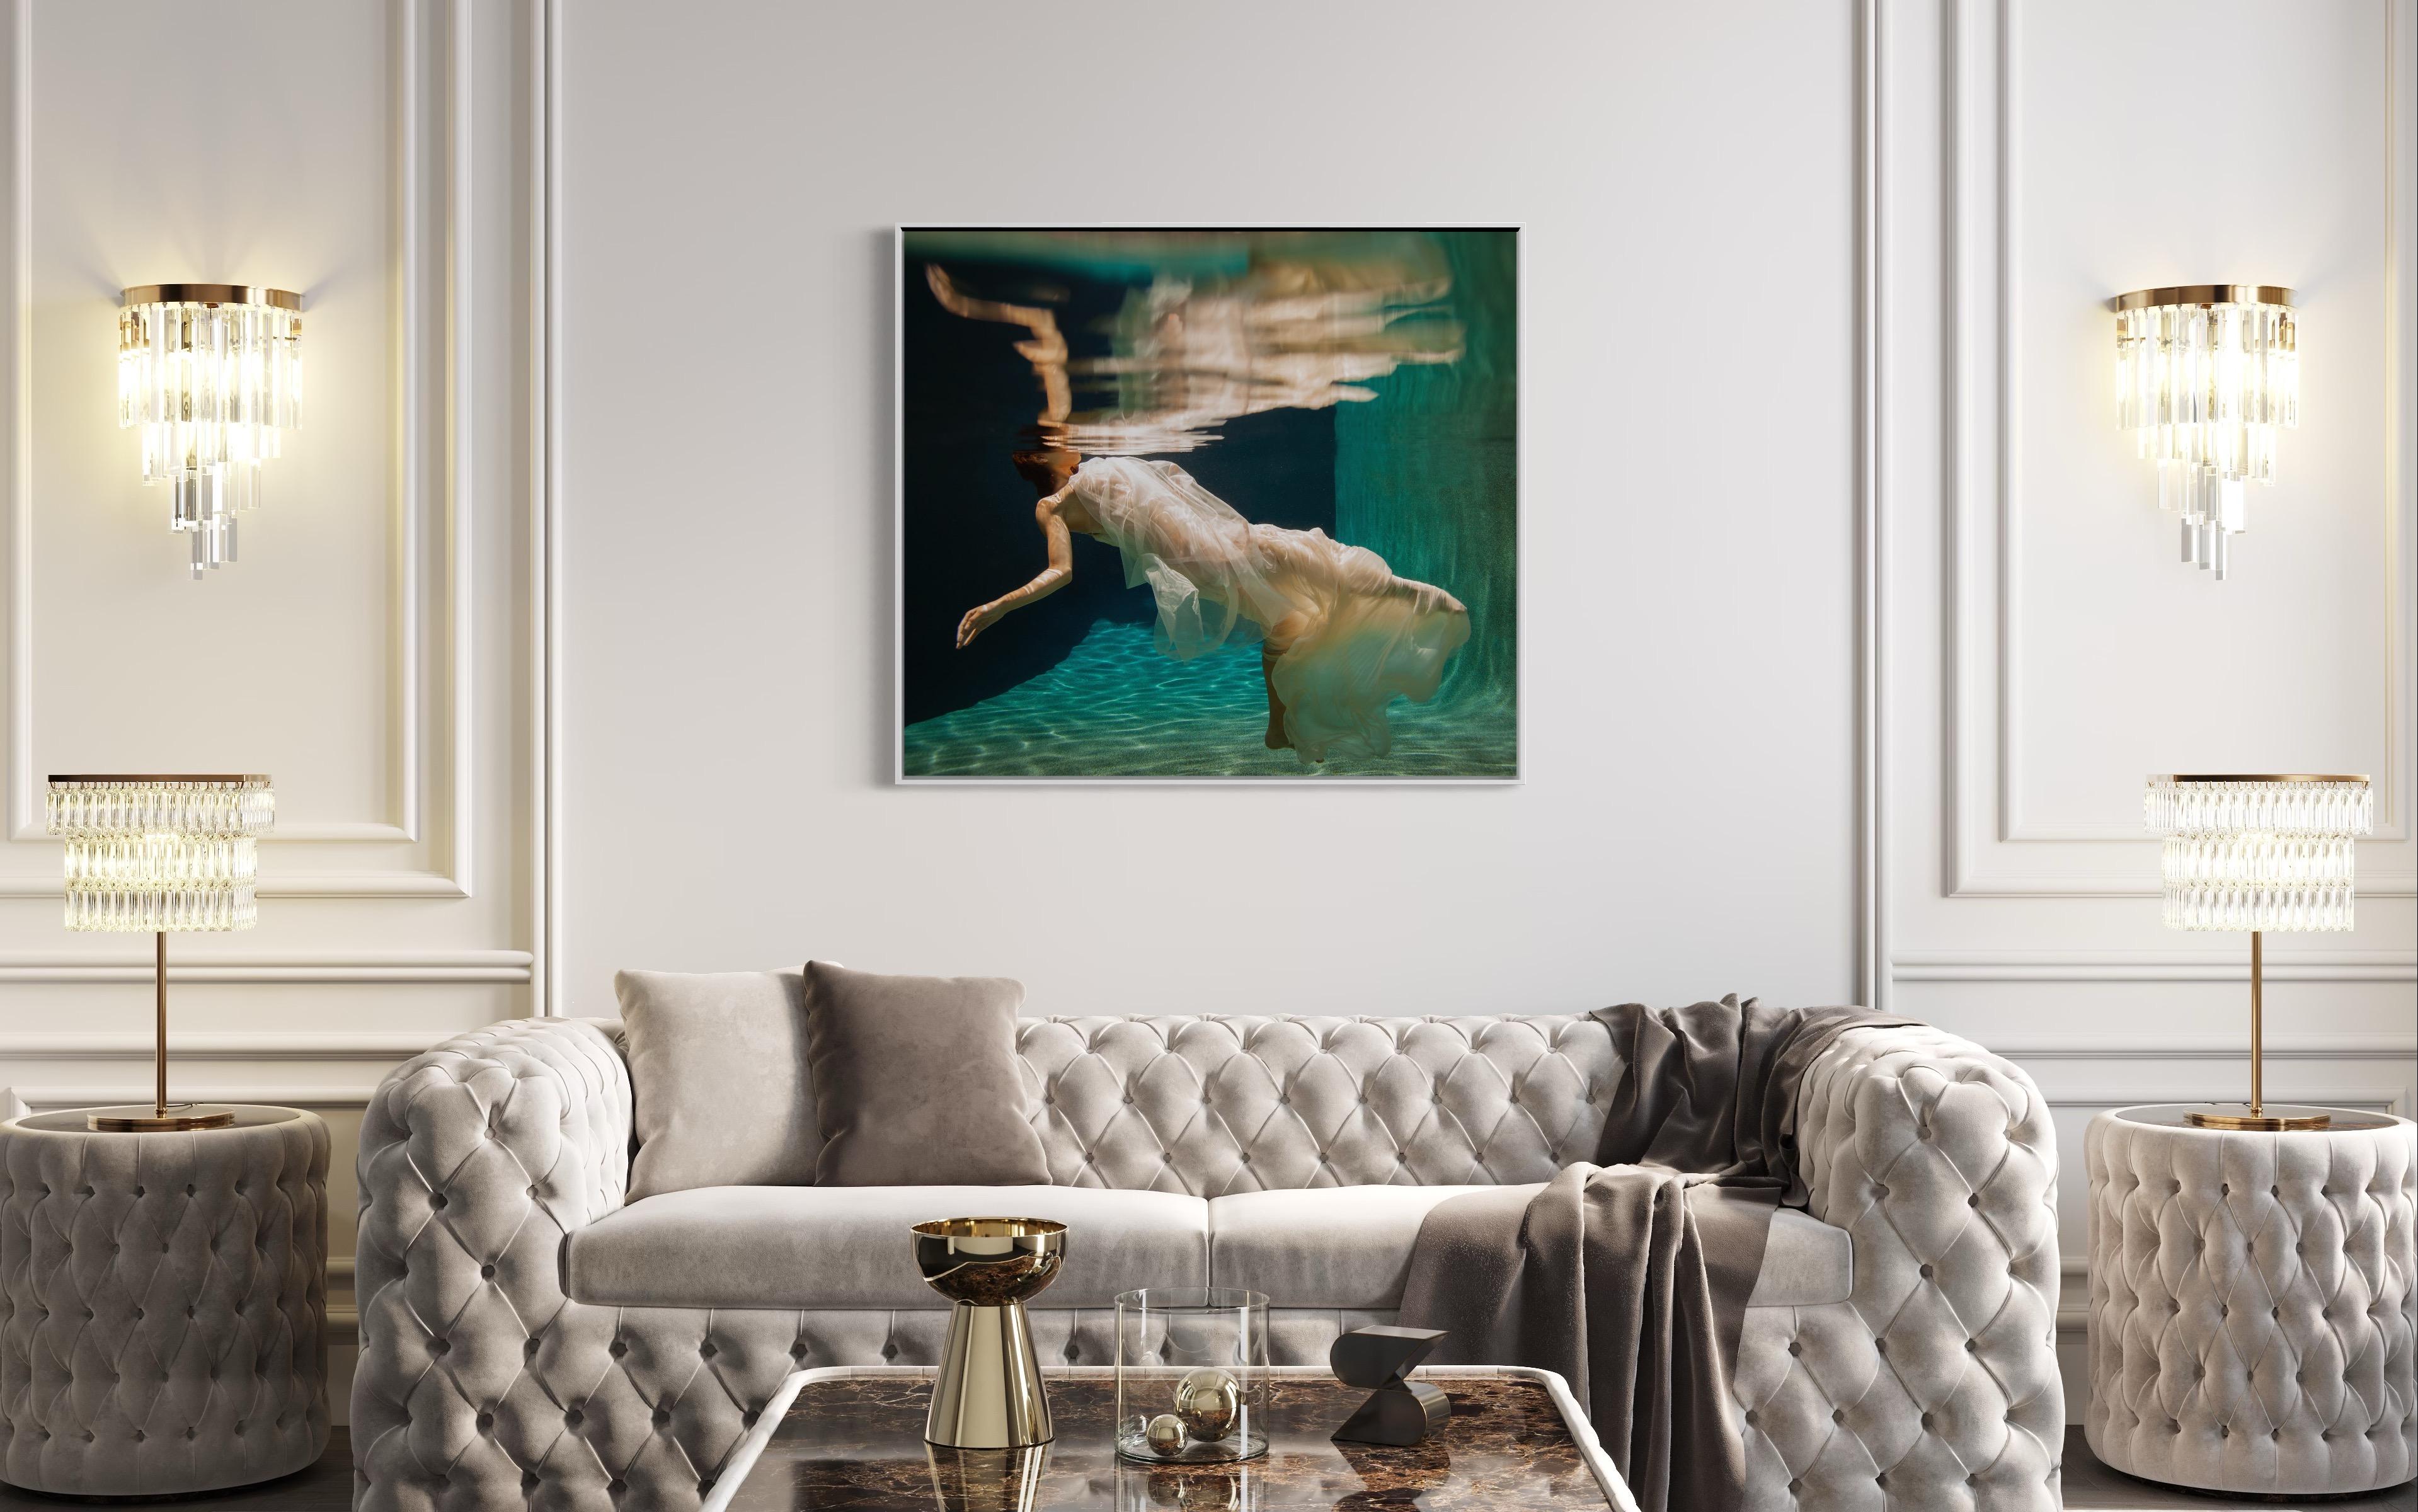 This contemporary figural limited edition fine art photograph by Alyssa Fortin captures a female figure wrapped in soft, light, creme-colored fabric, floating beneath the surface of water, with her face just above the surface and not visible to the